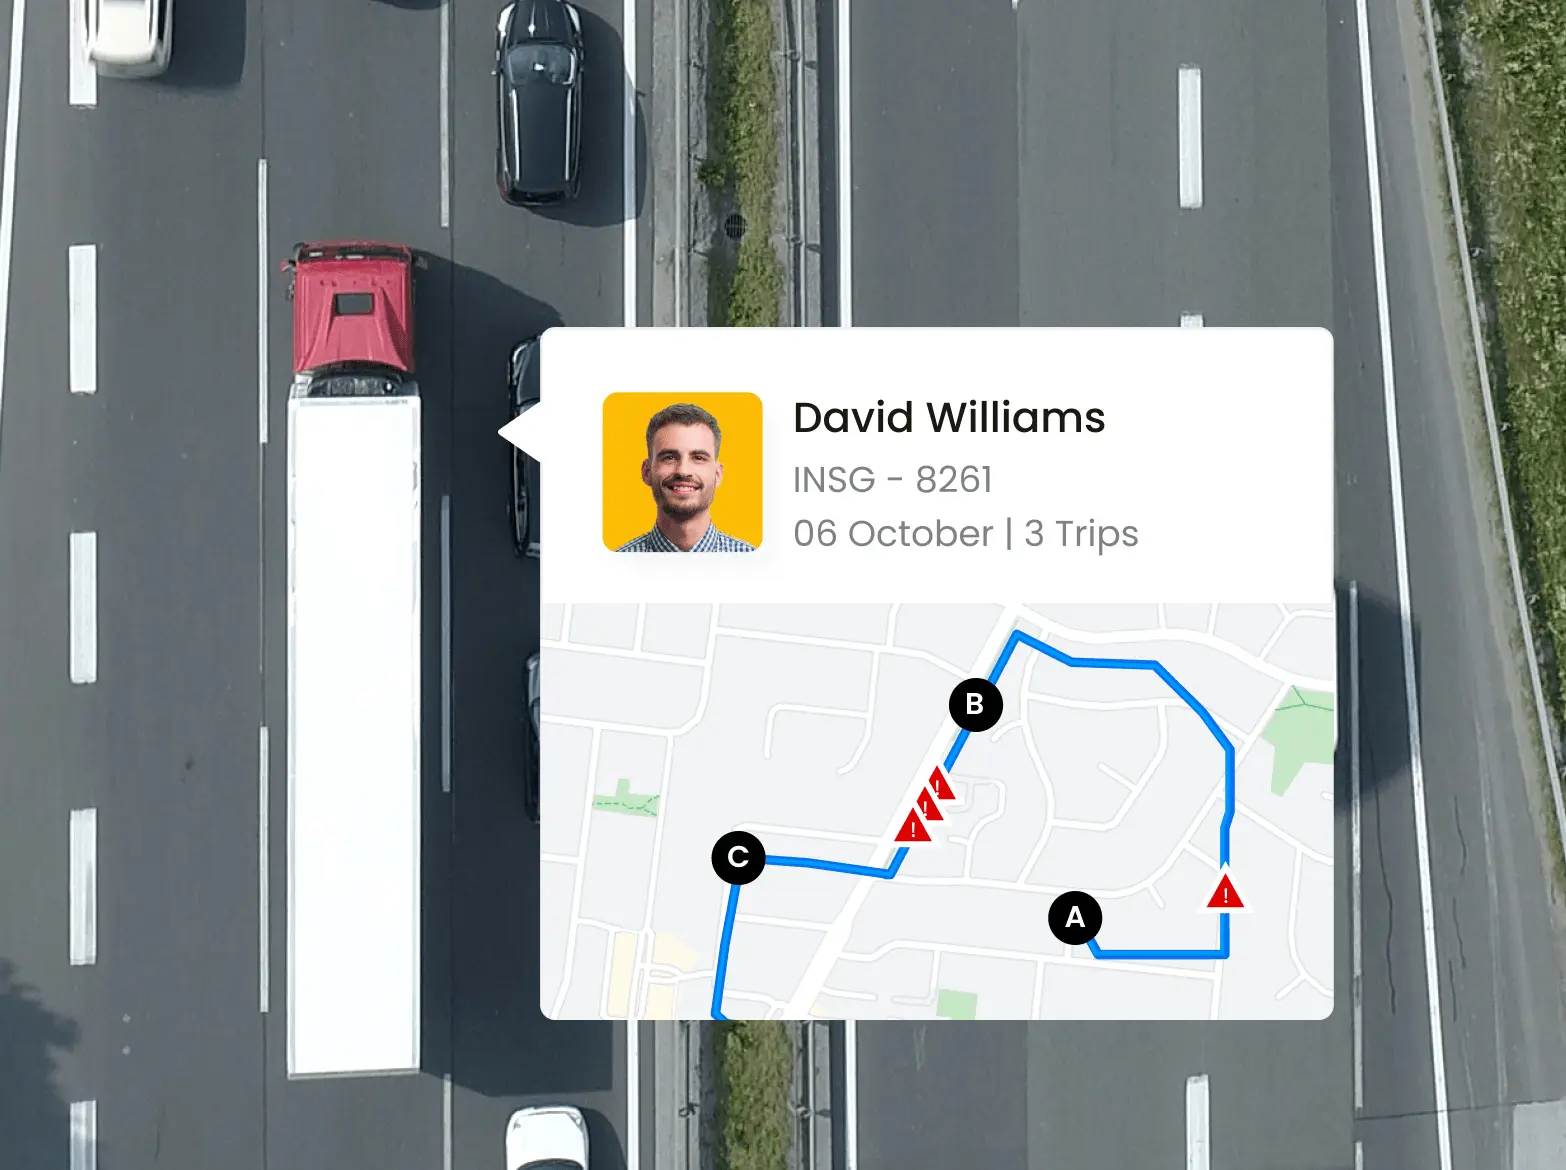 Showcase of Inseego's fleet tracking software giving you information on a driver's trip.